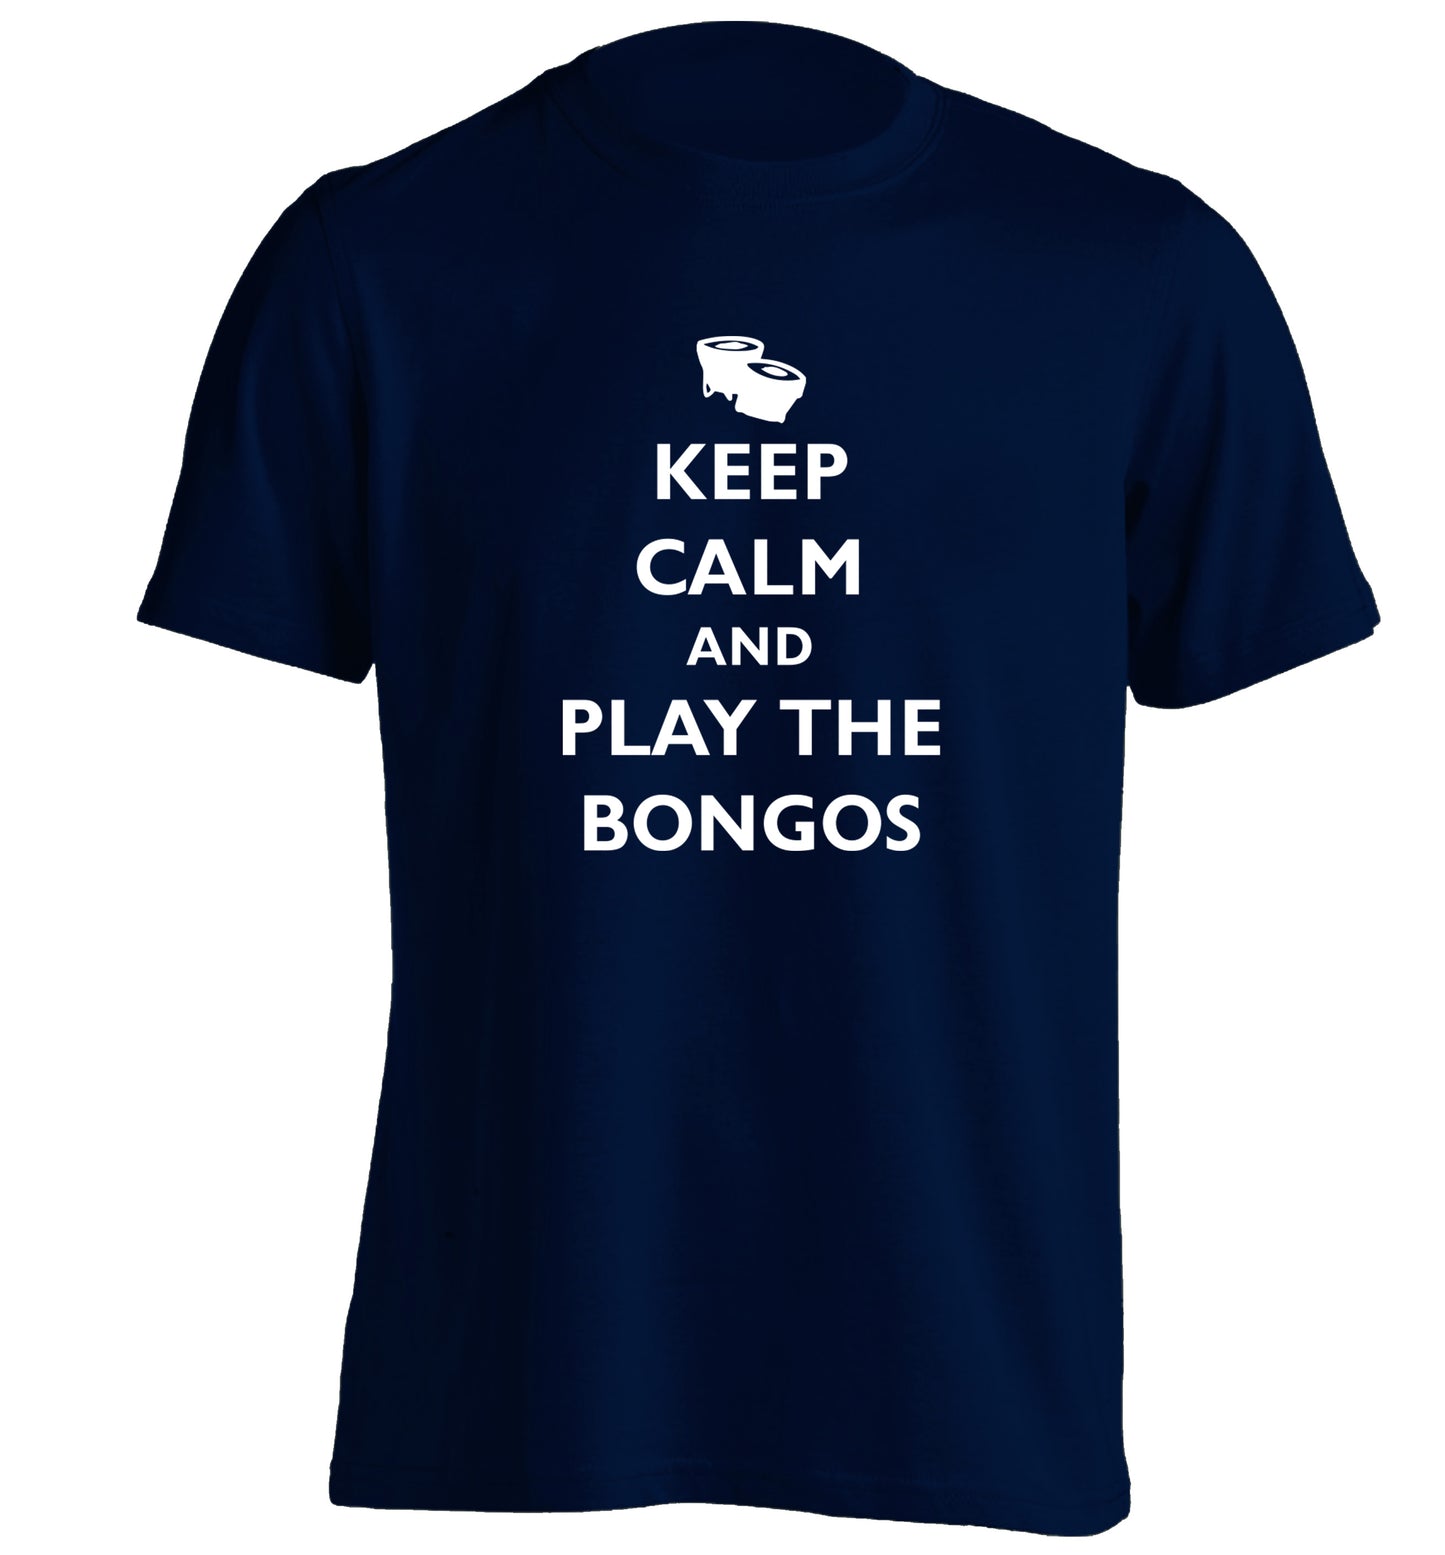 Keep calm and play the bongos adults unisex navy Tshirt 2XL